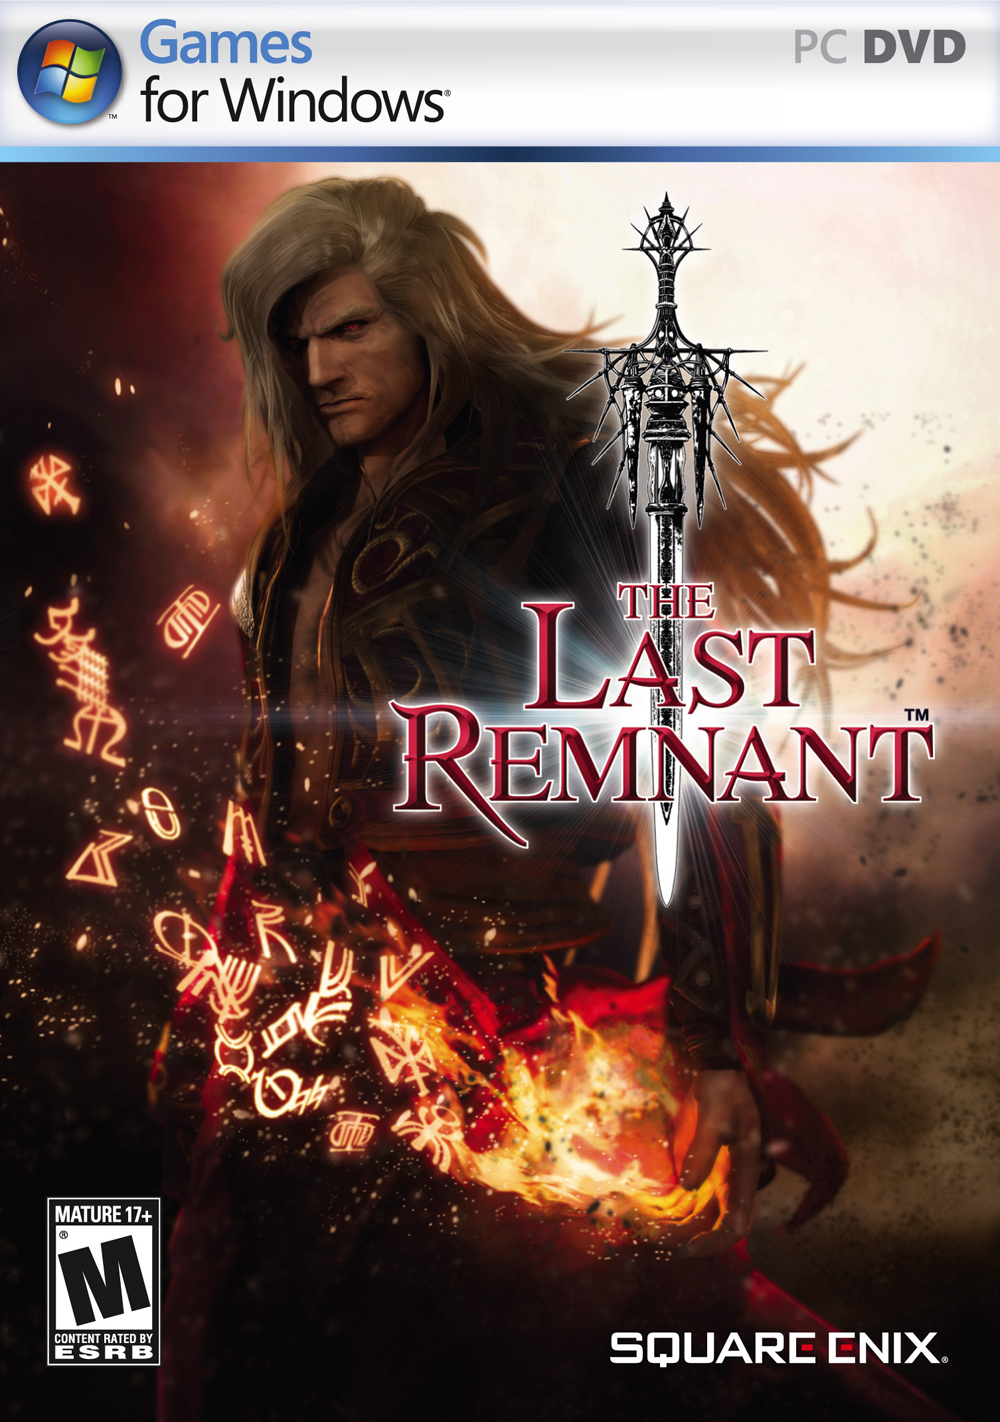 The Last Remnant #1